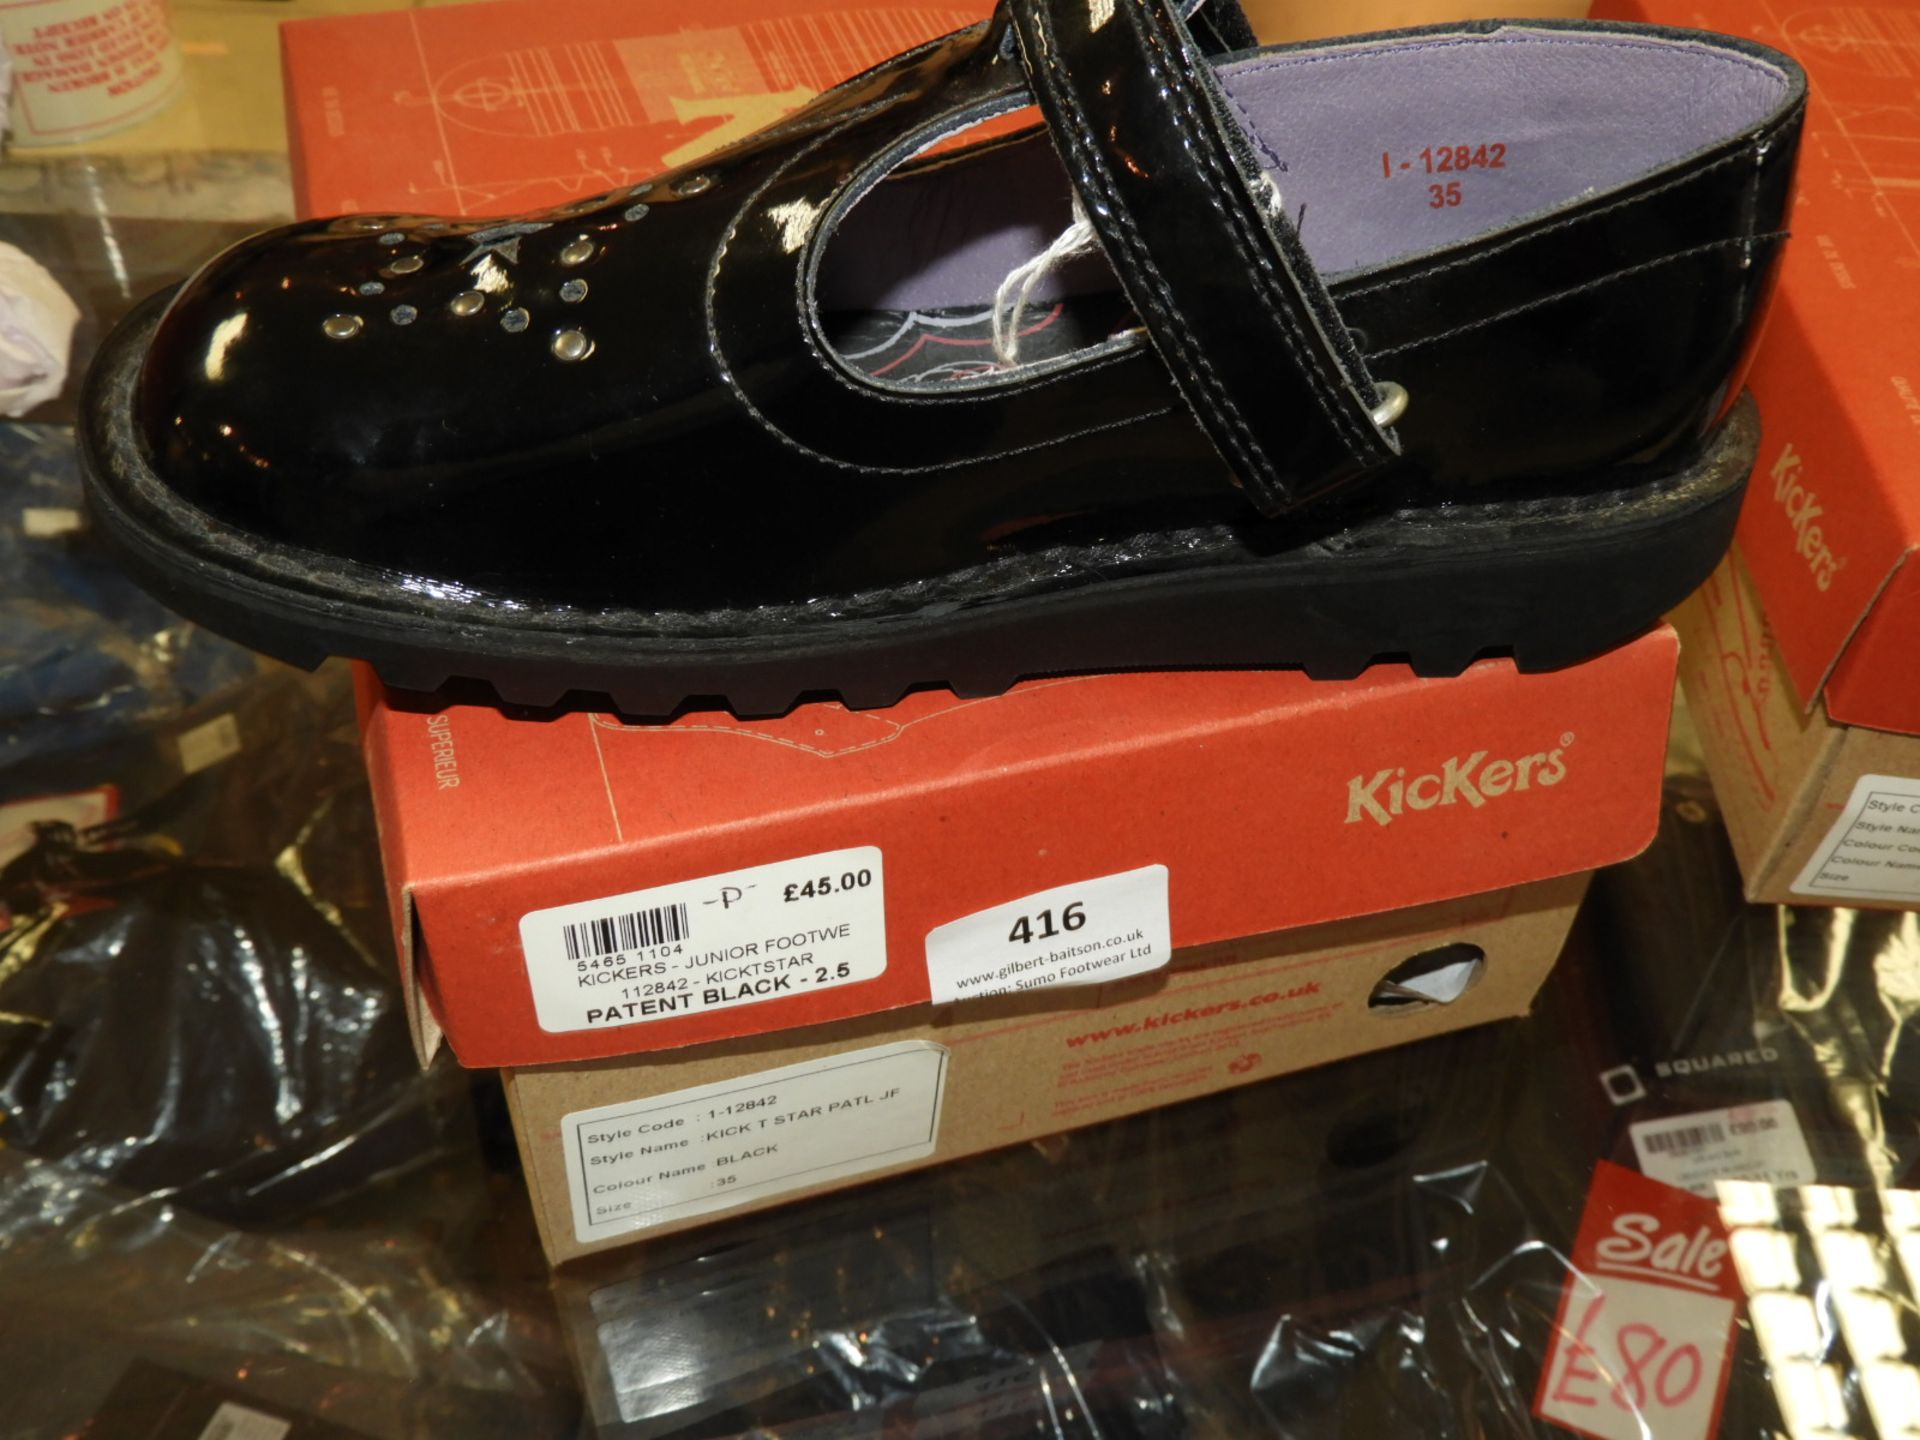 Pair of Childrens Kickers (Black Patent) Size: 2.5